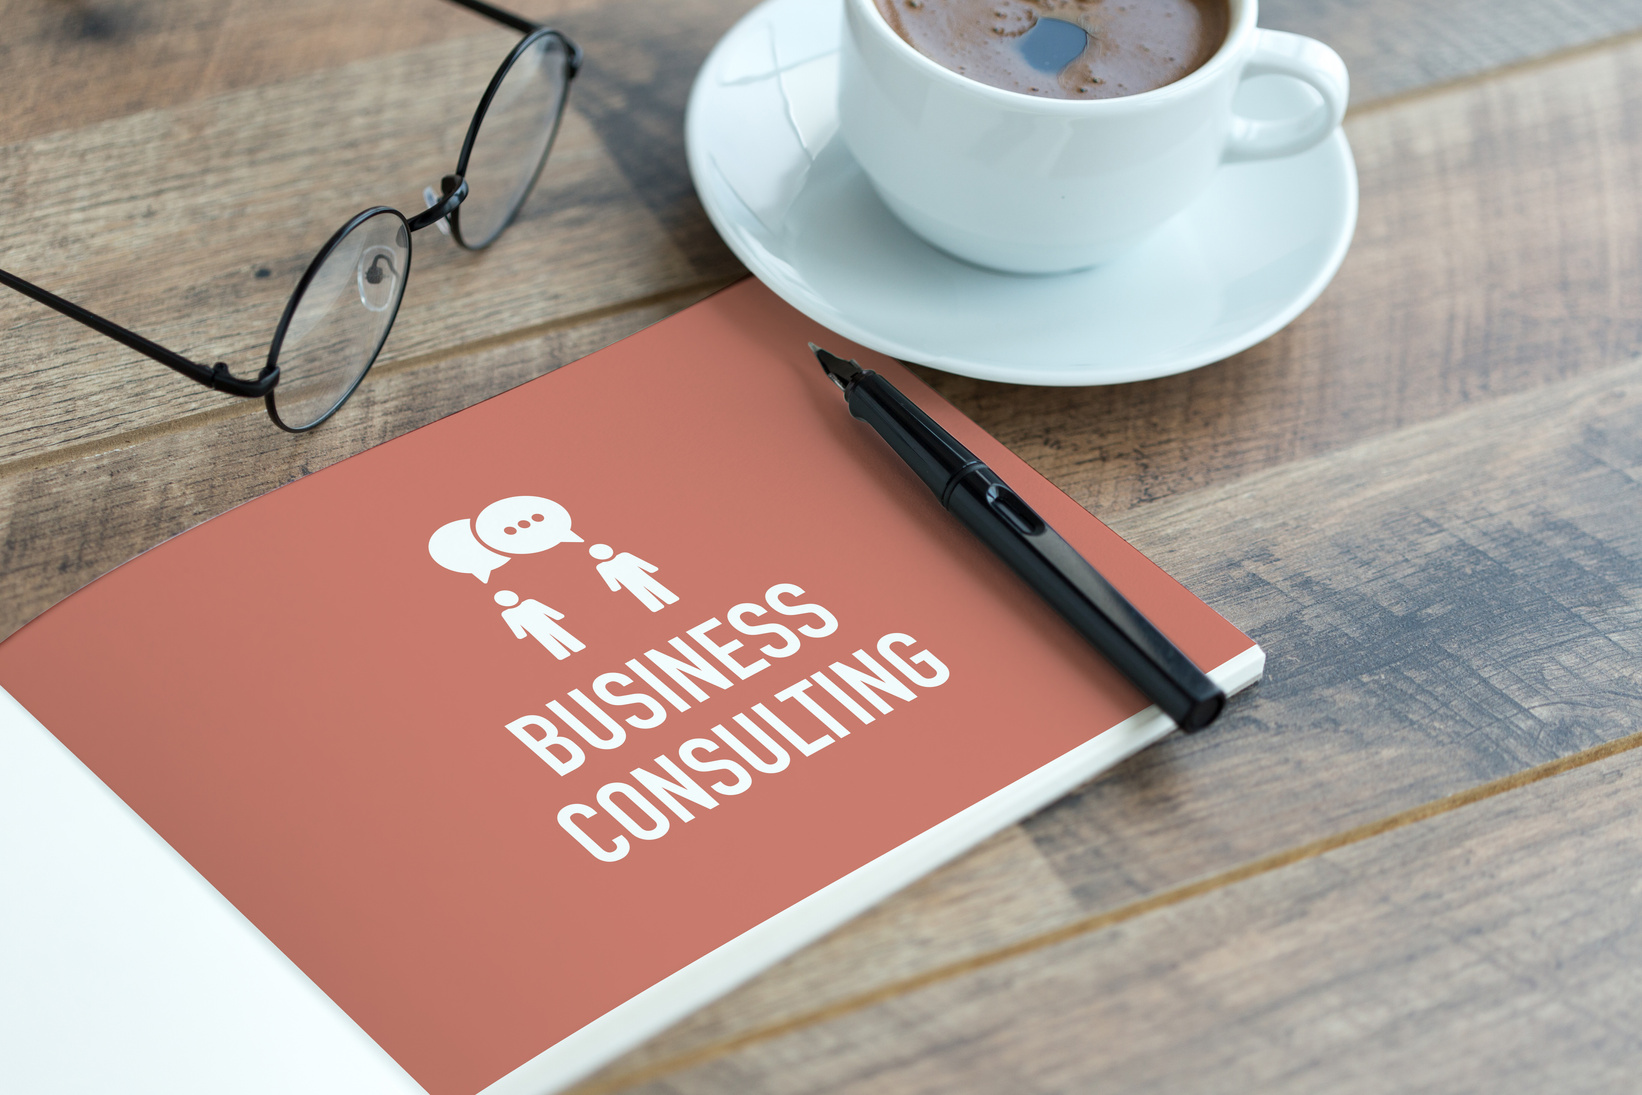 BUSINESS CONSULTING CONCEPT